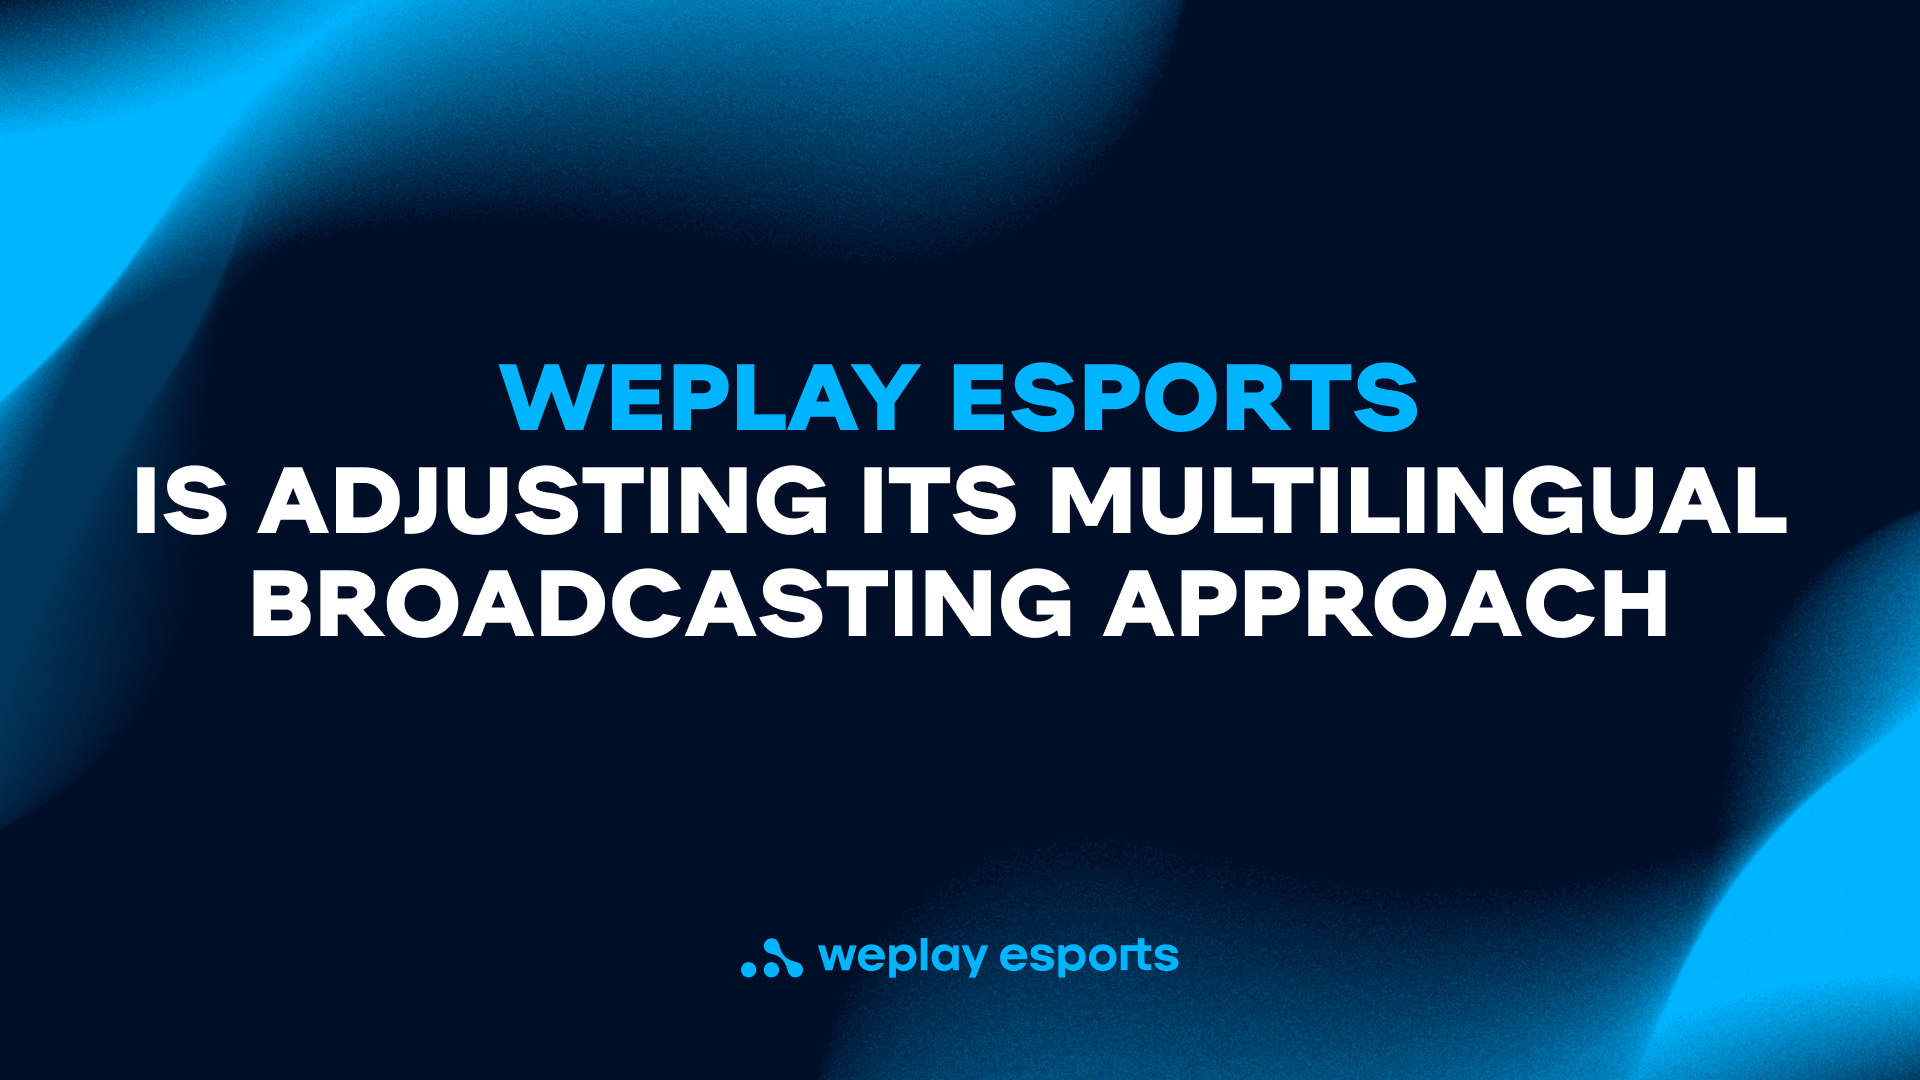 WePlay Esports is adjusting its multilingual broadcasting approach. Visual: WePlay Holding